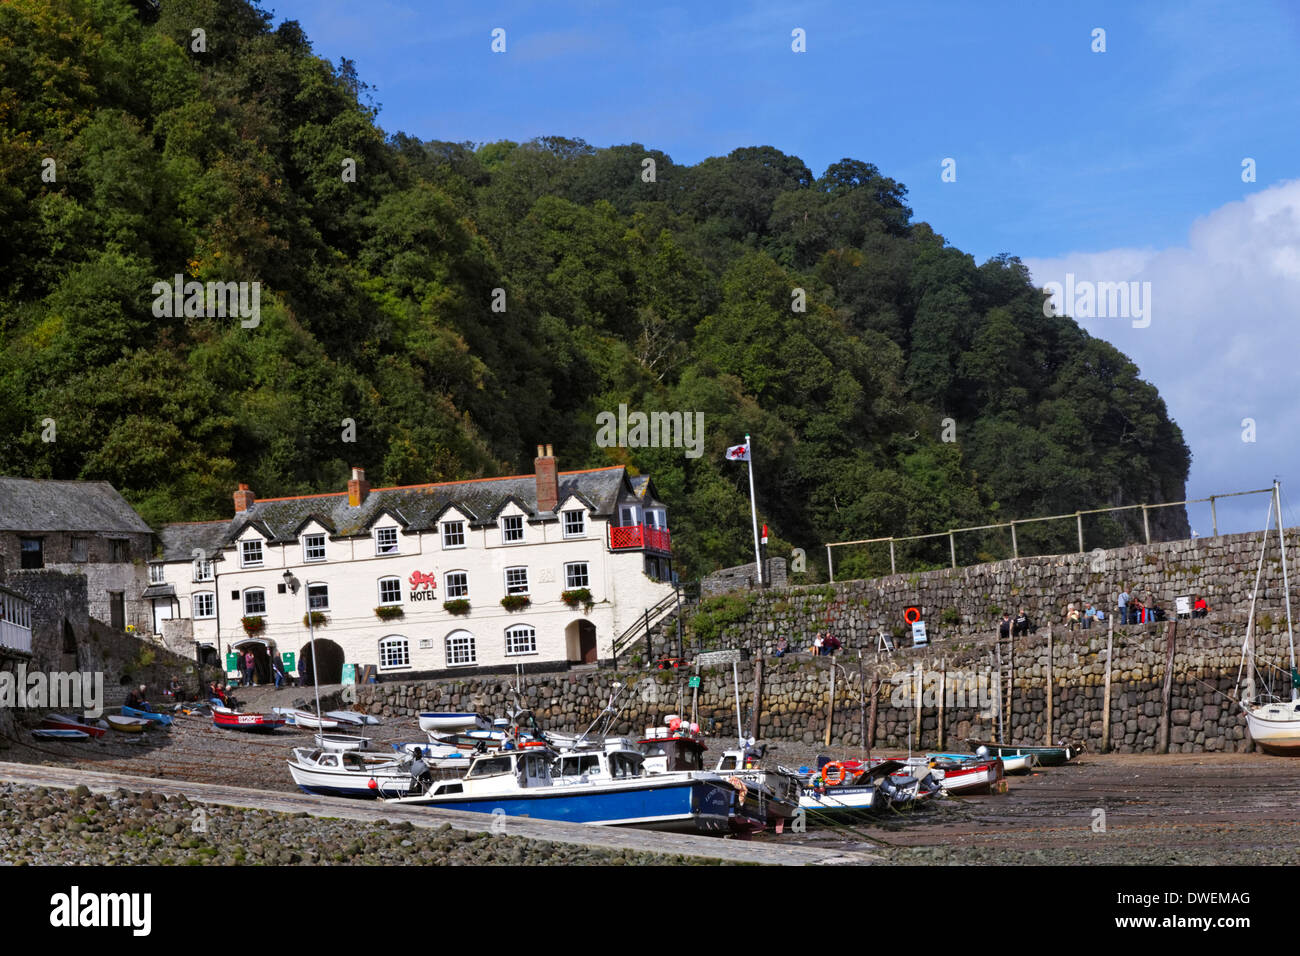 The Red Lion hotel in the village of Clovelly, Devon, England Stock Photo